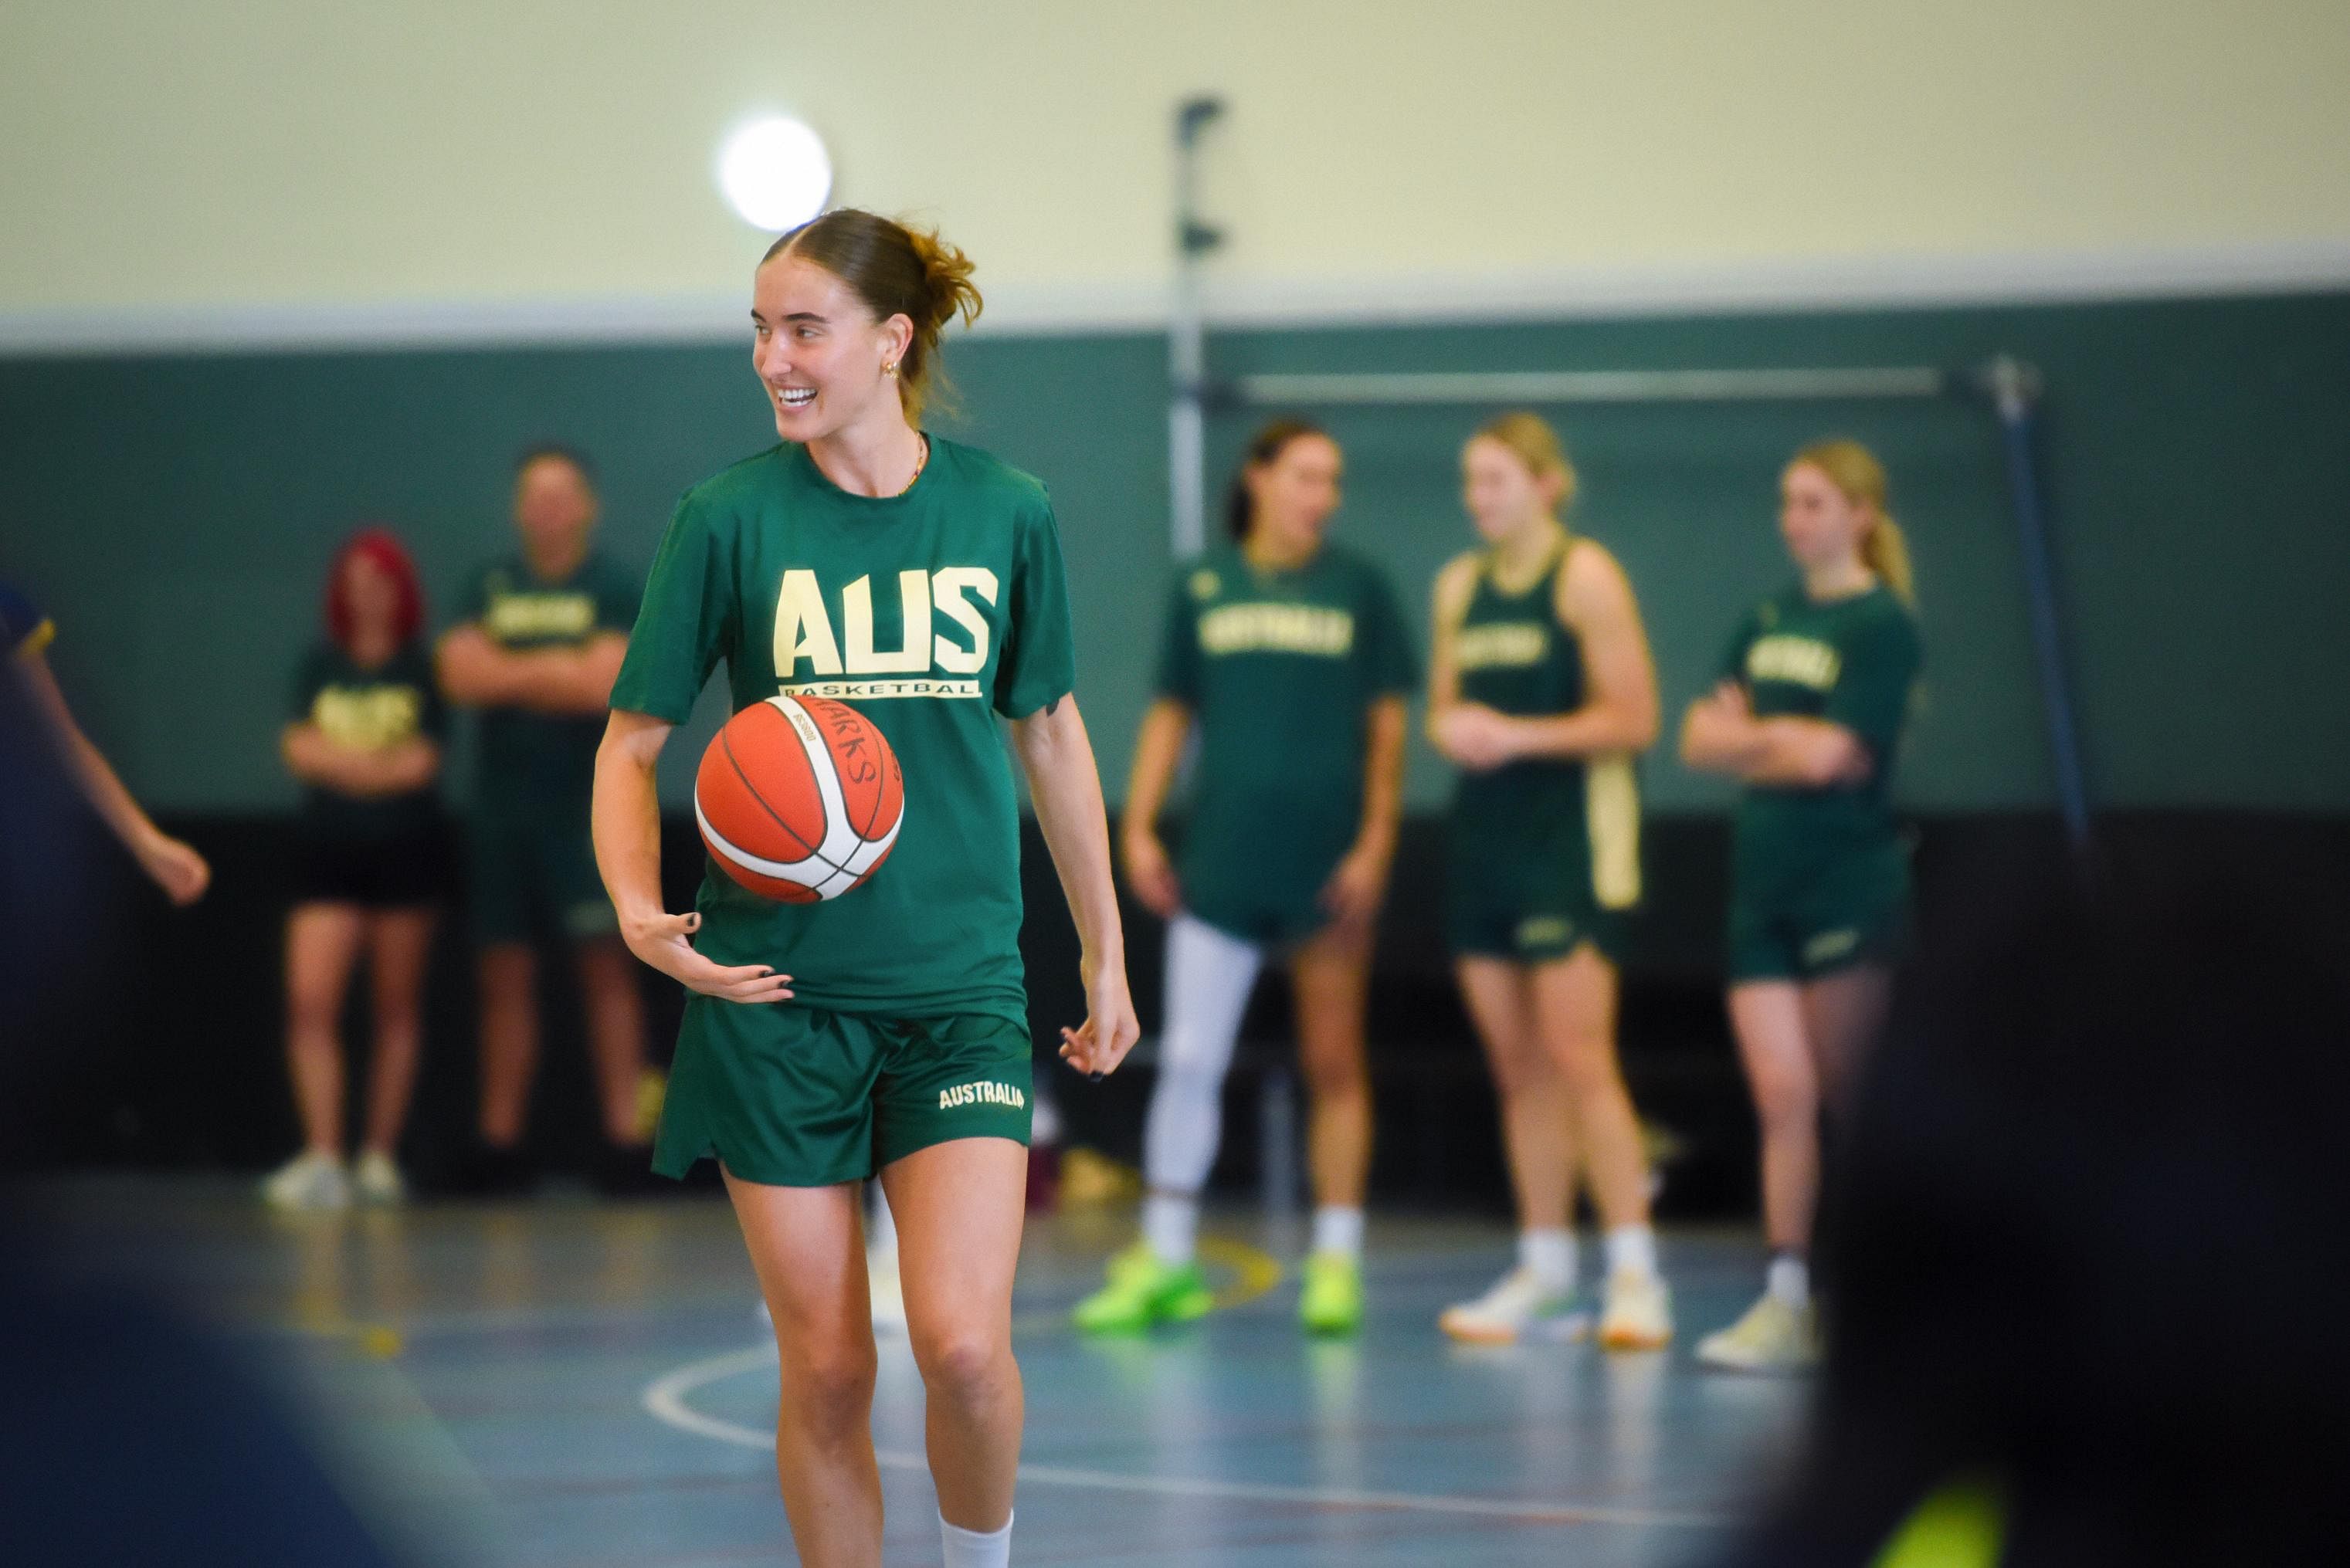 Paris Olympics the dream for Australia women’s 3x3 basketball team after missing out on Tokyo Games